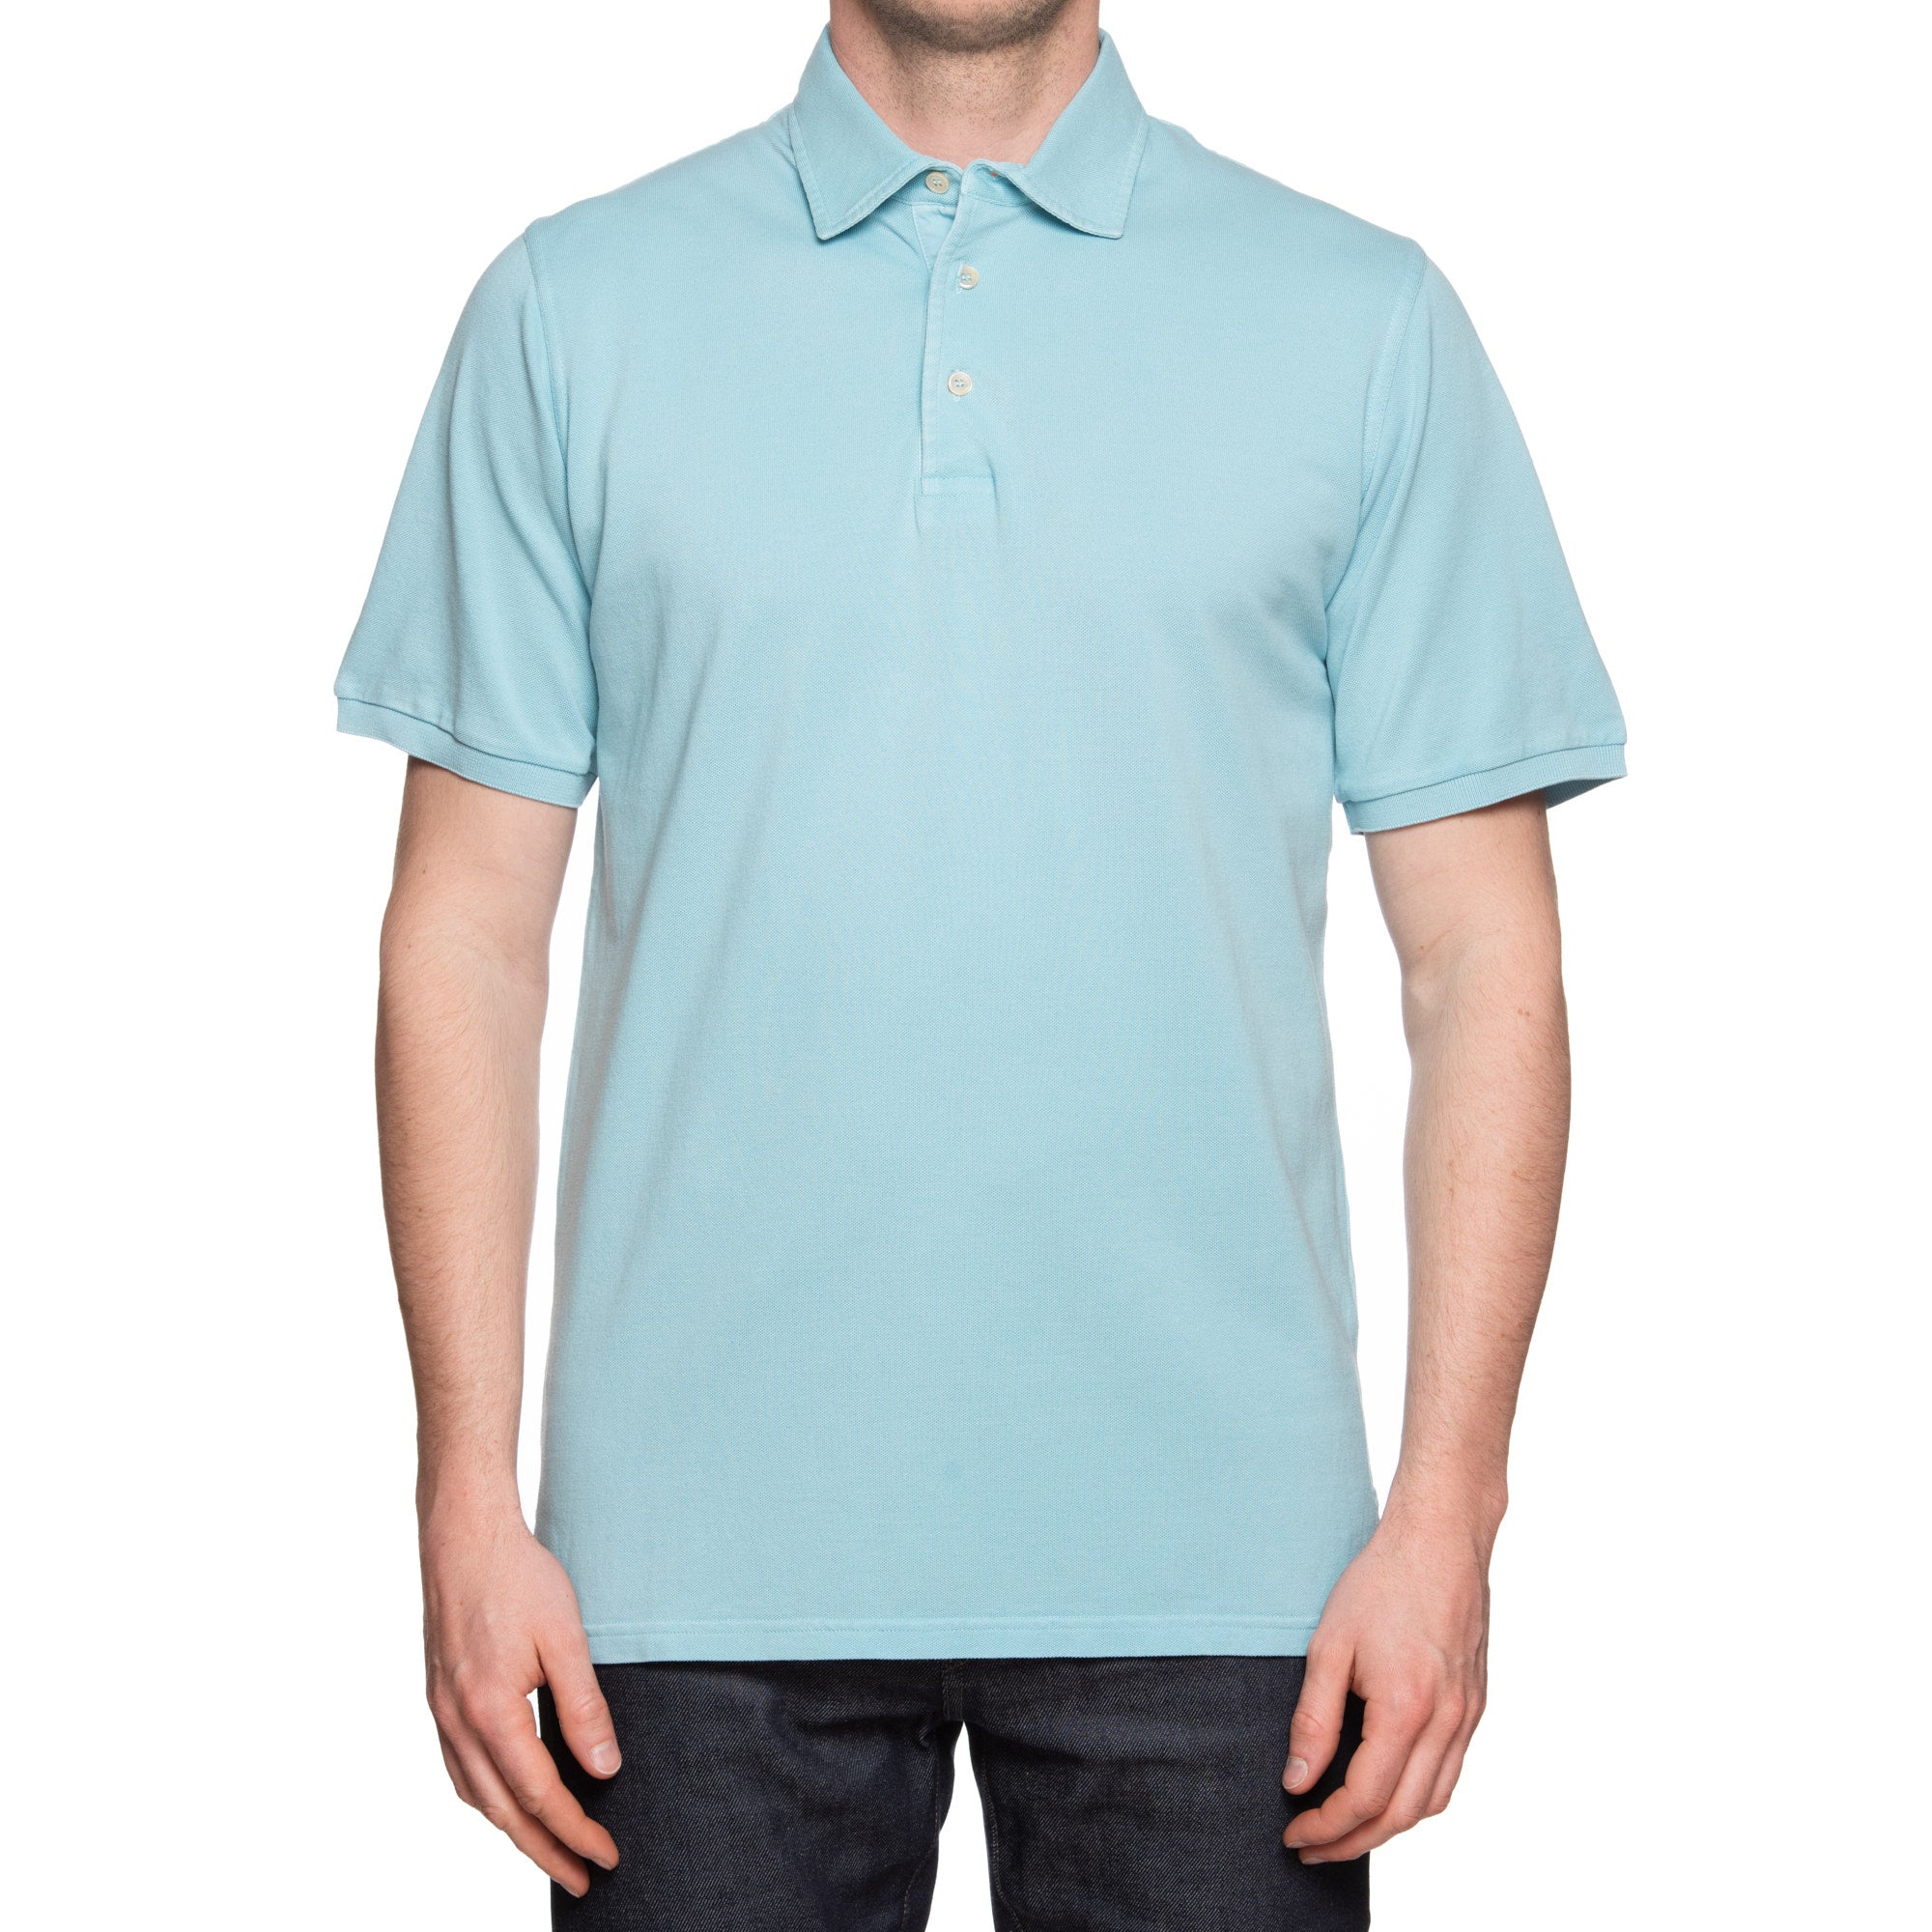 FEDELI "North" Solid Turquoise Cotton Pique Short Sleeve Polo Shirt EU 50 NEW US M